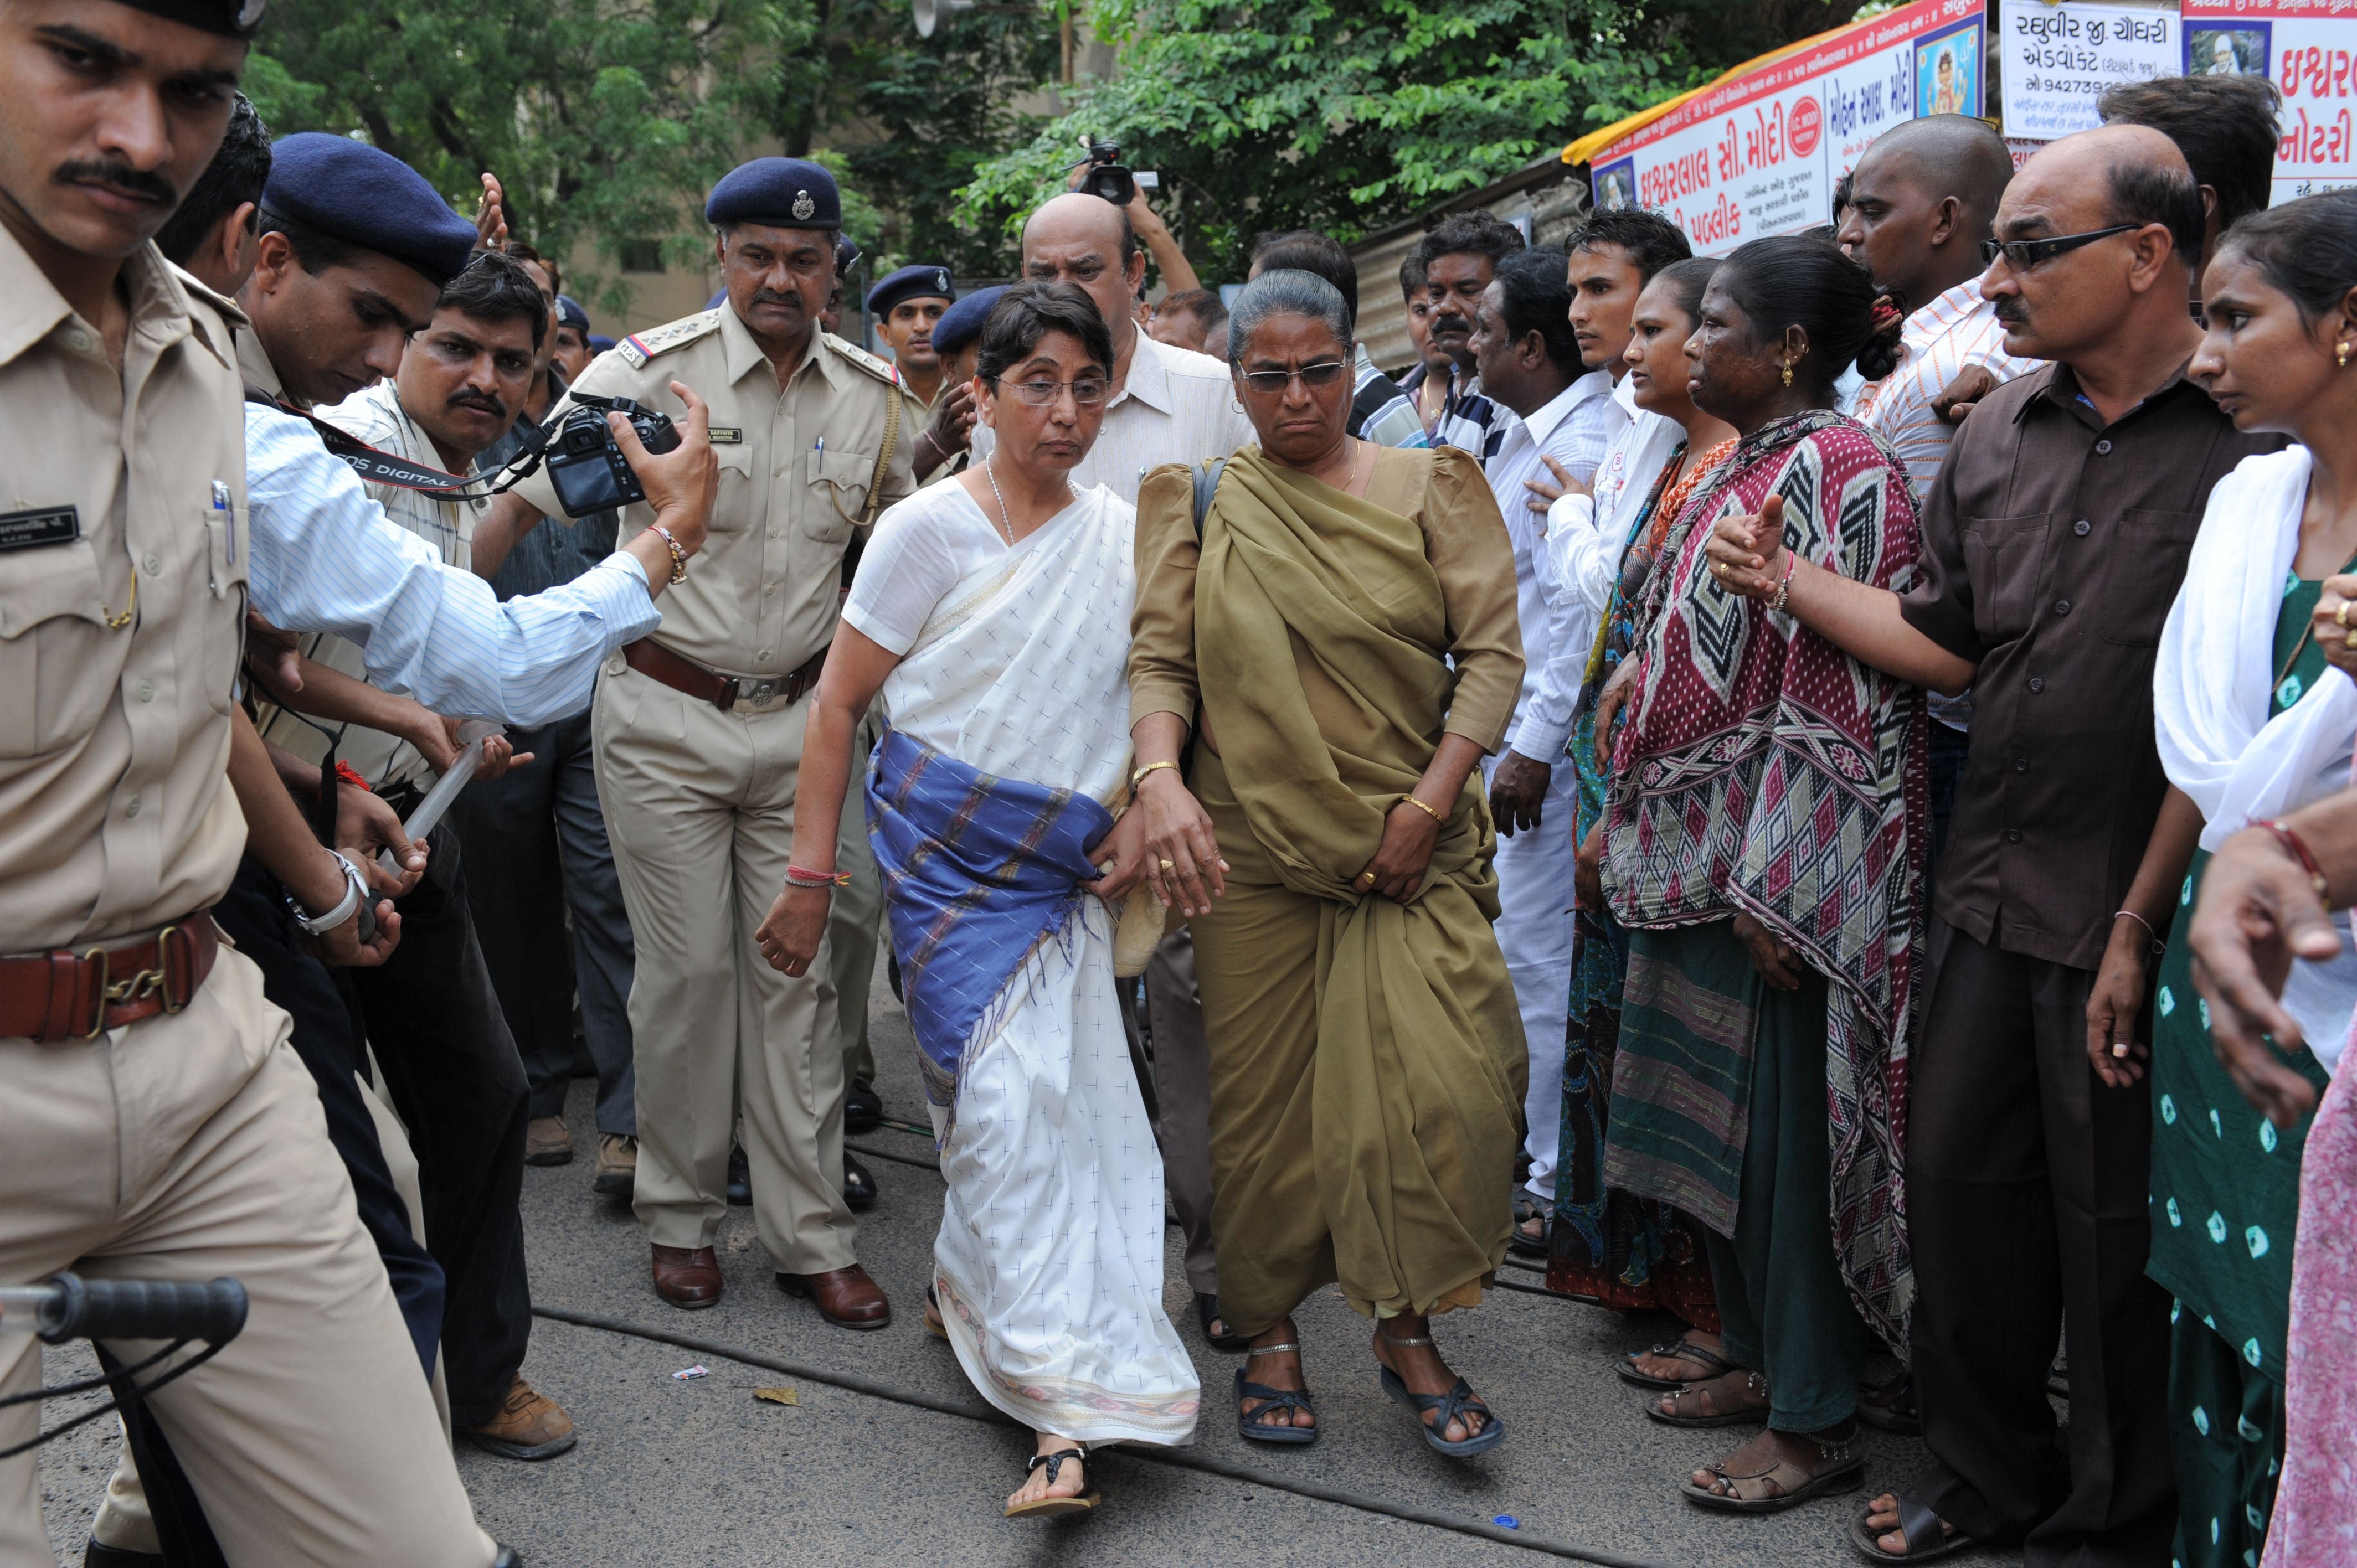 File photo: Former Bhartiya Janta Party MLA and ex-minister in the Narendra Modi state government, Maya Kodnani, is escorted by police on her arrival at a special court in Ahmedabad on 31 August 2012